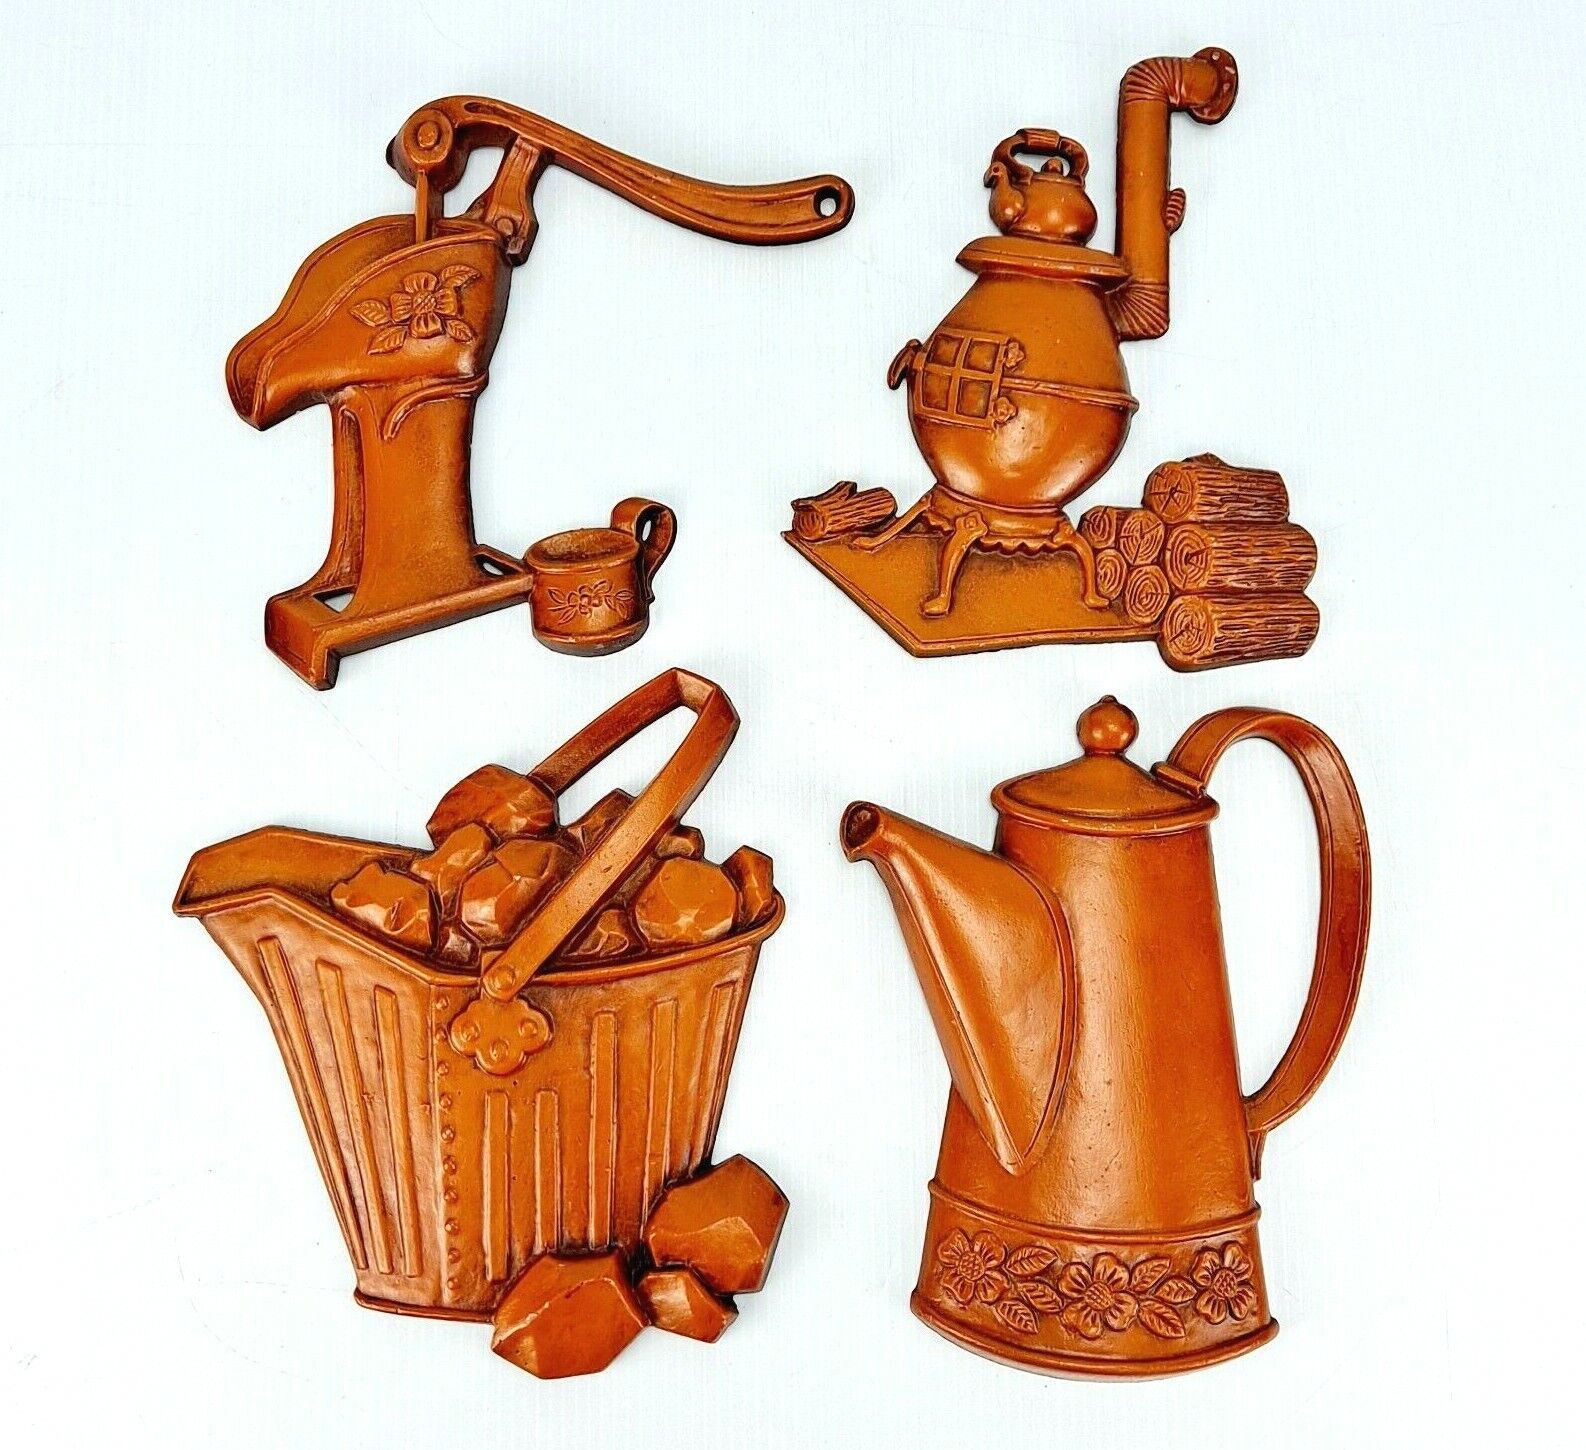 VINTAGE 1960\'S 4-PC SEXTON CAST METALWARE KITCHEN WALL DECOR SET - MADE IN USA